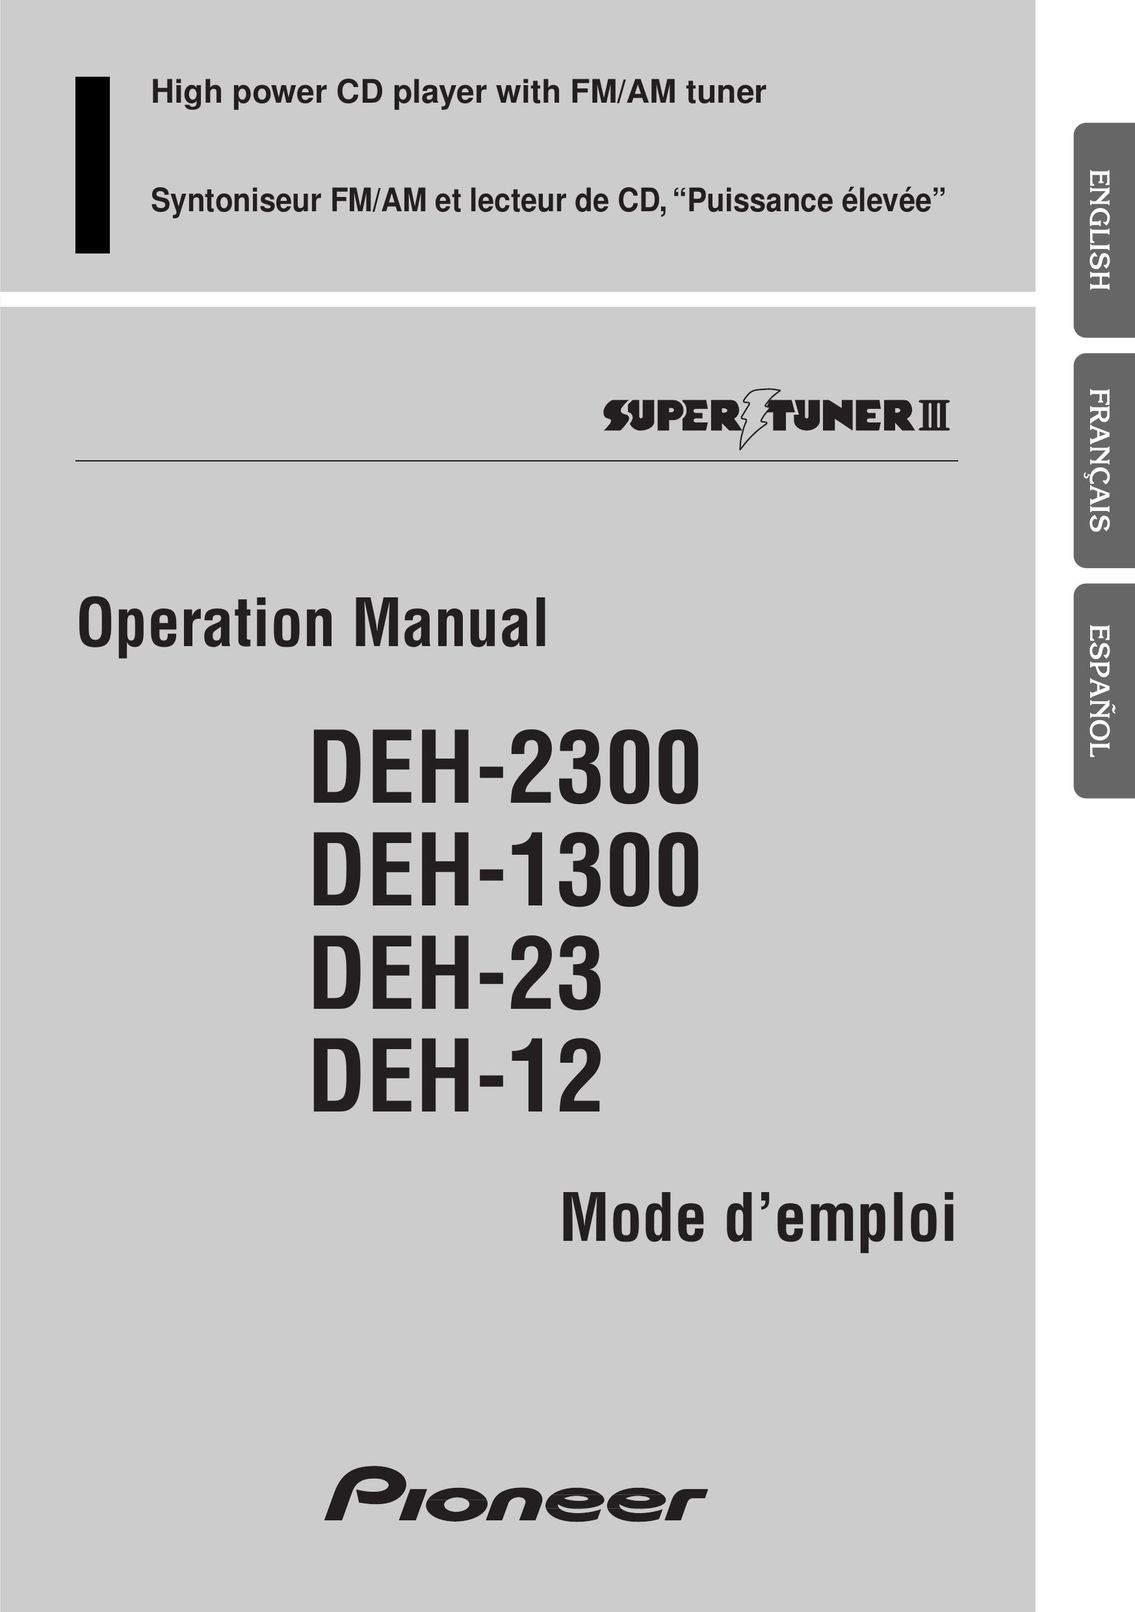 Pioneer DEH-23 Stereo System User Manual